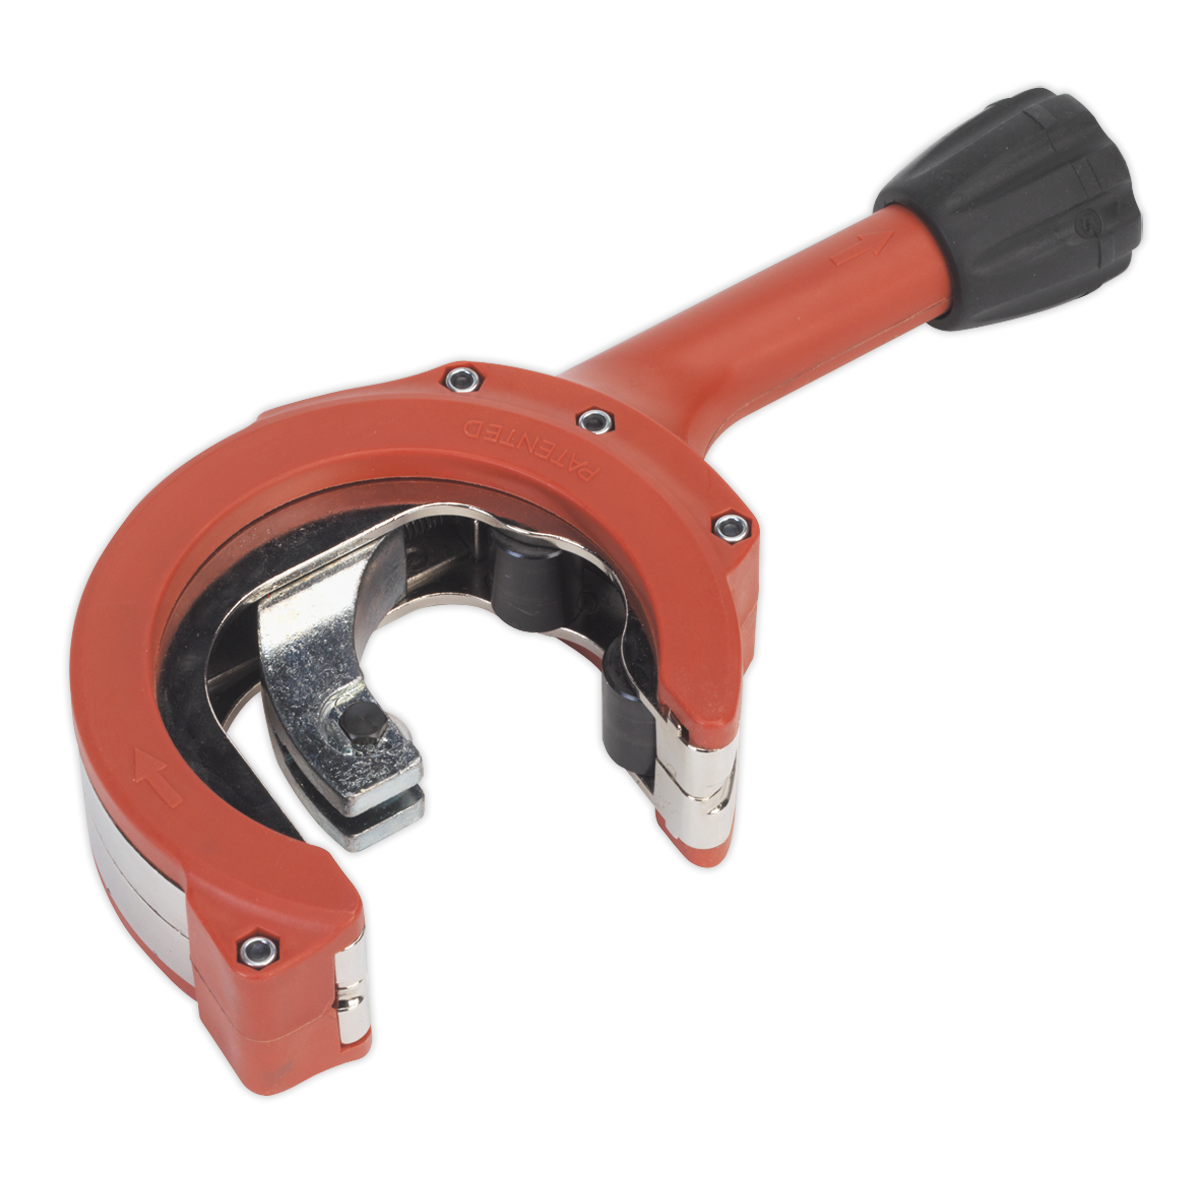 Sealey VS16371 67mm Pipe Cutter   - Ratchet action